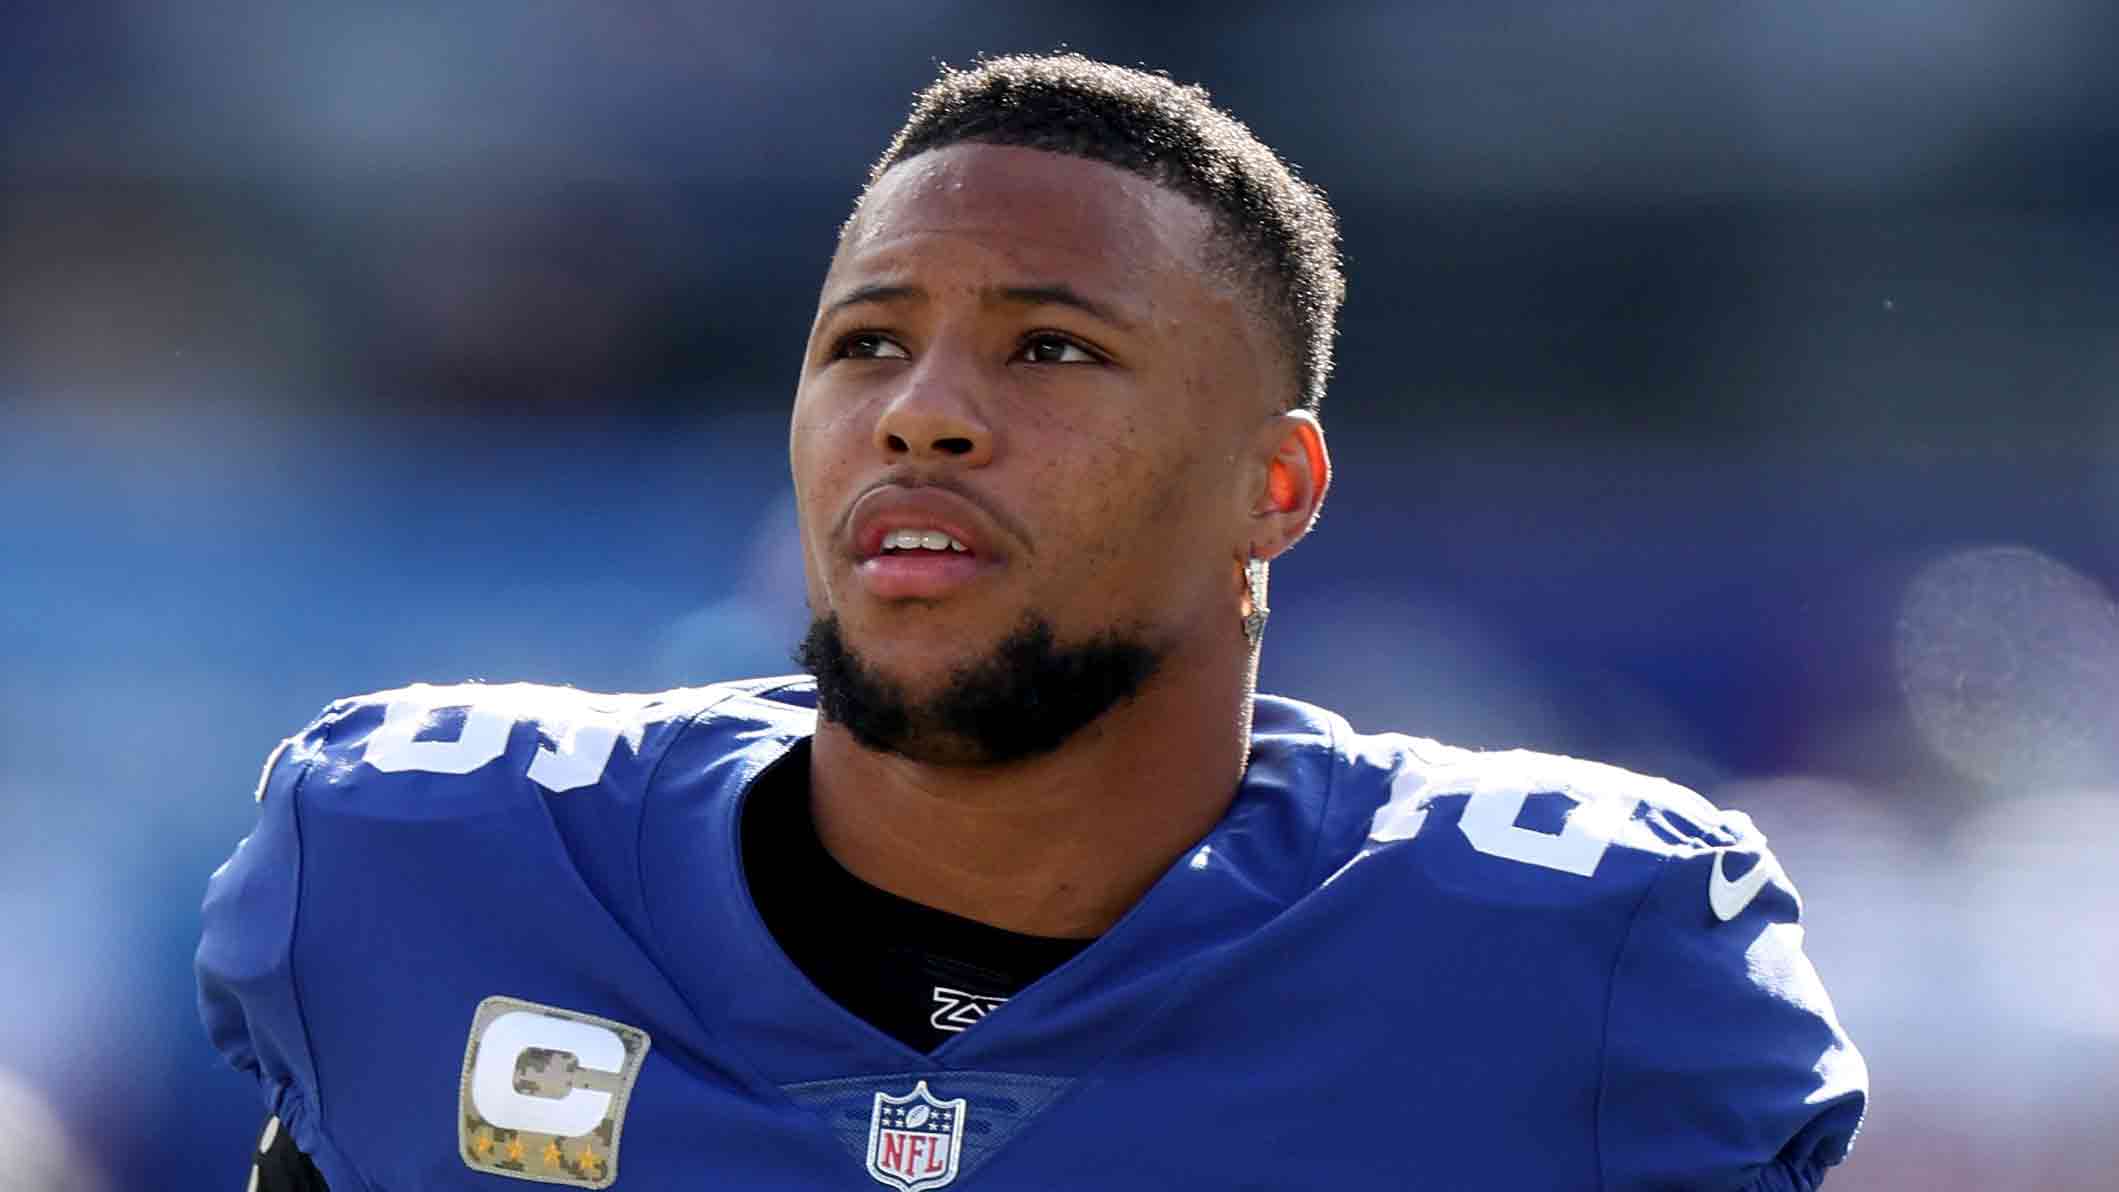 Saquon Barkley and Giants agree to one-year deal, per report – NBC